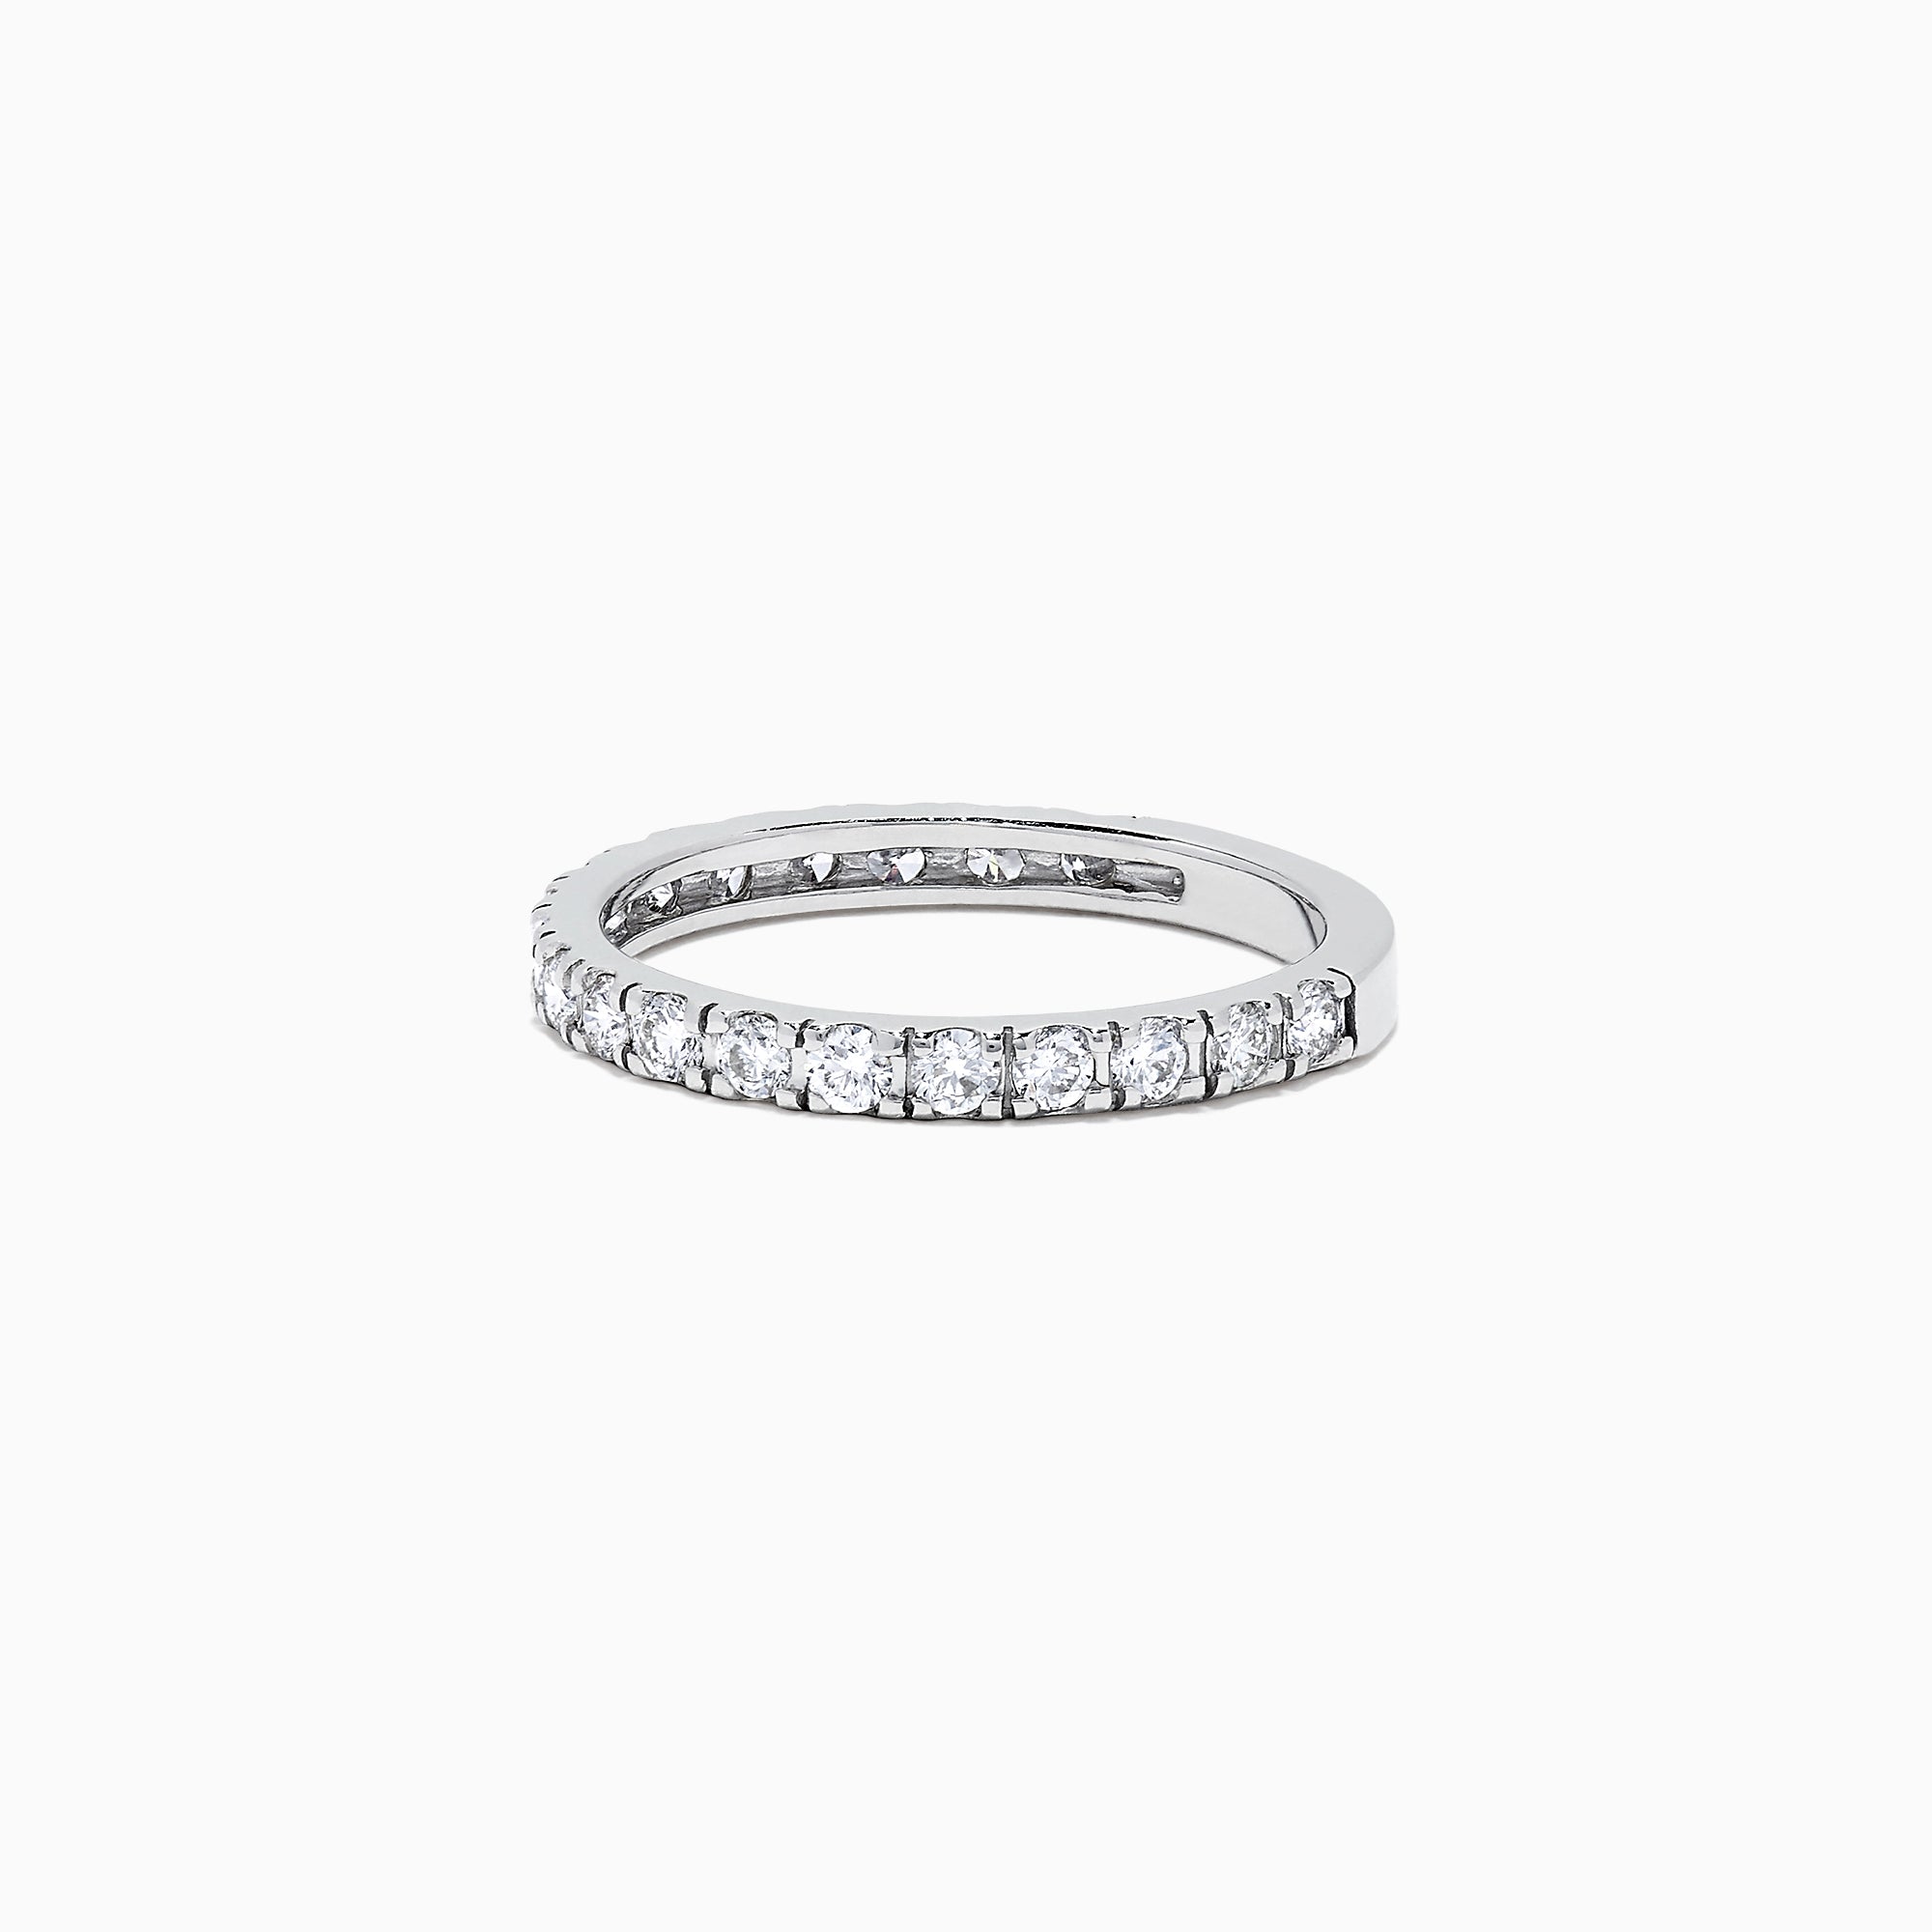 Effy Pave Classica 14K White Gold Diamond Stack Ring, 0.65 TCW